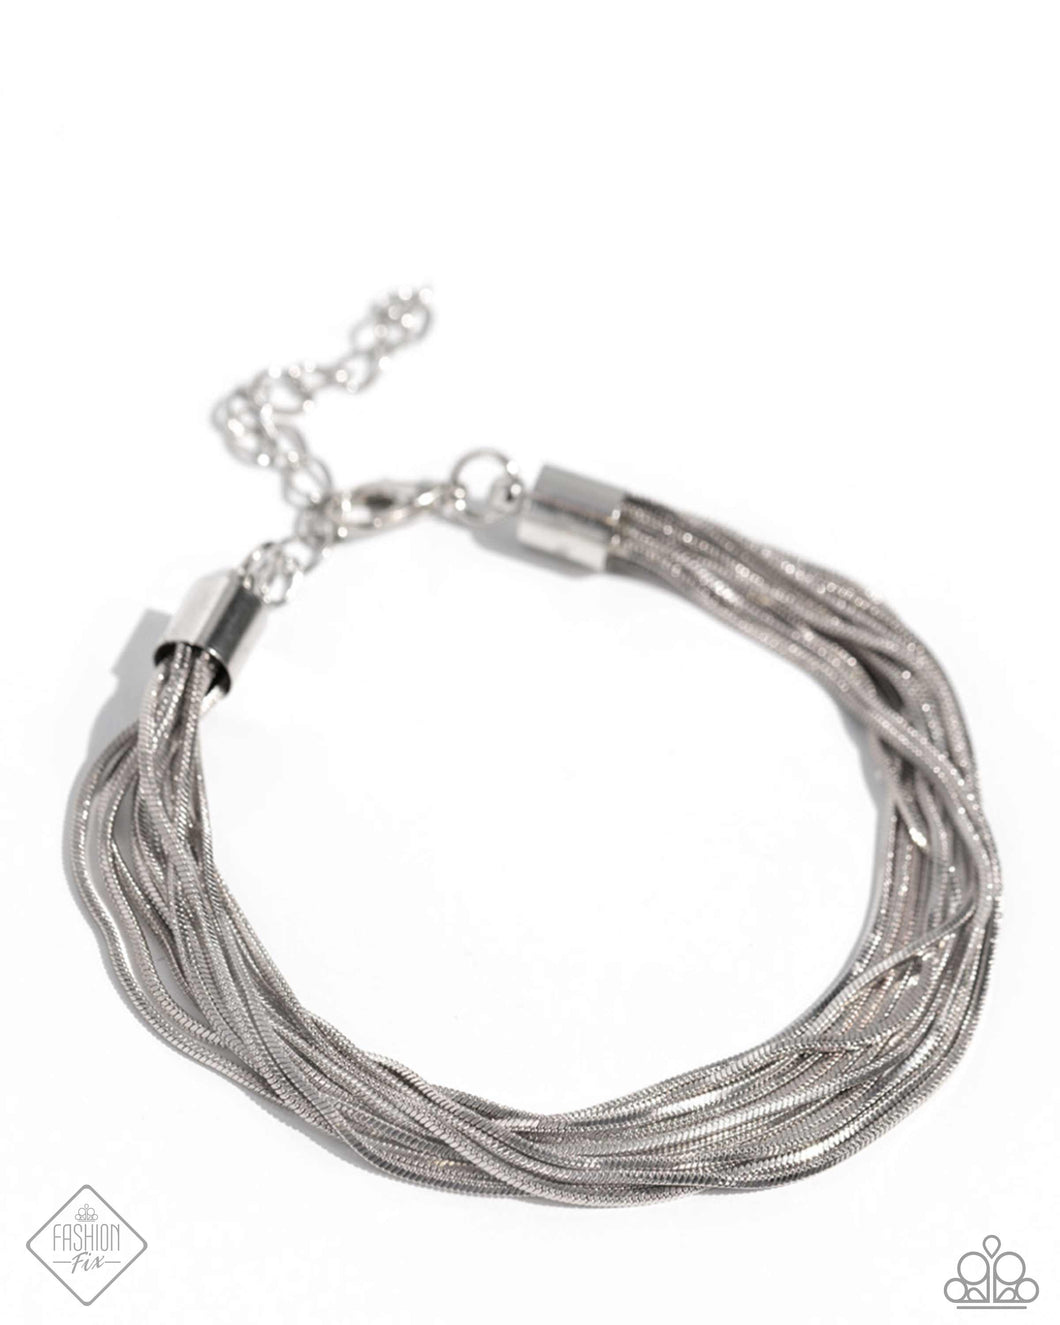 By a Show of STRANDS - Silver Bracelet (MM-0424)